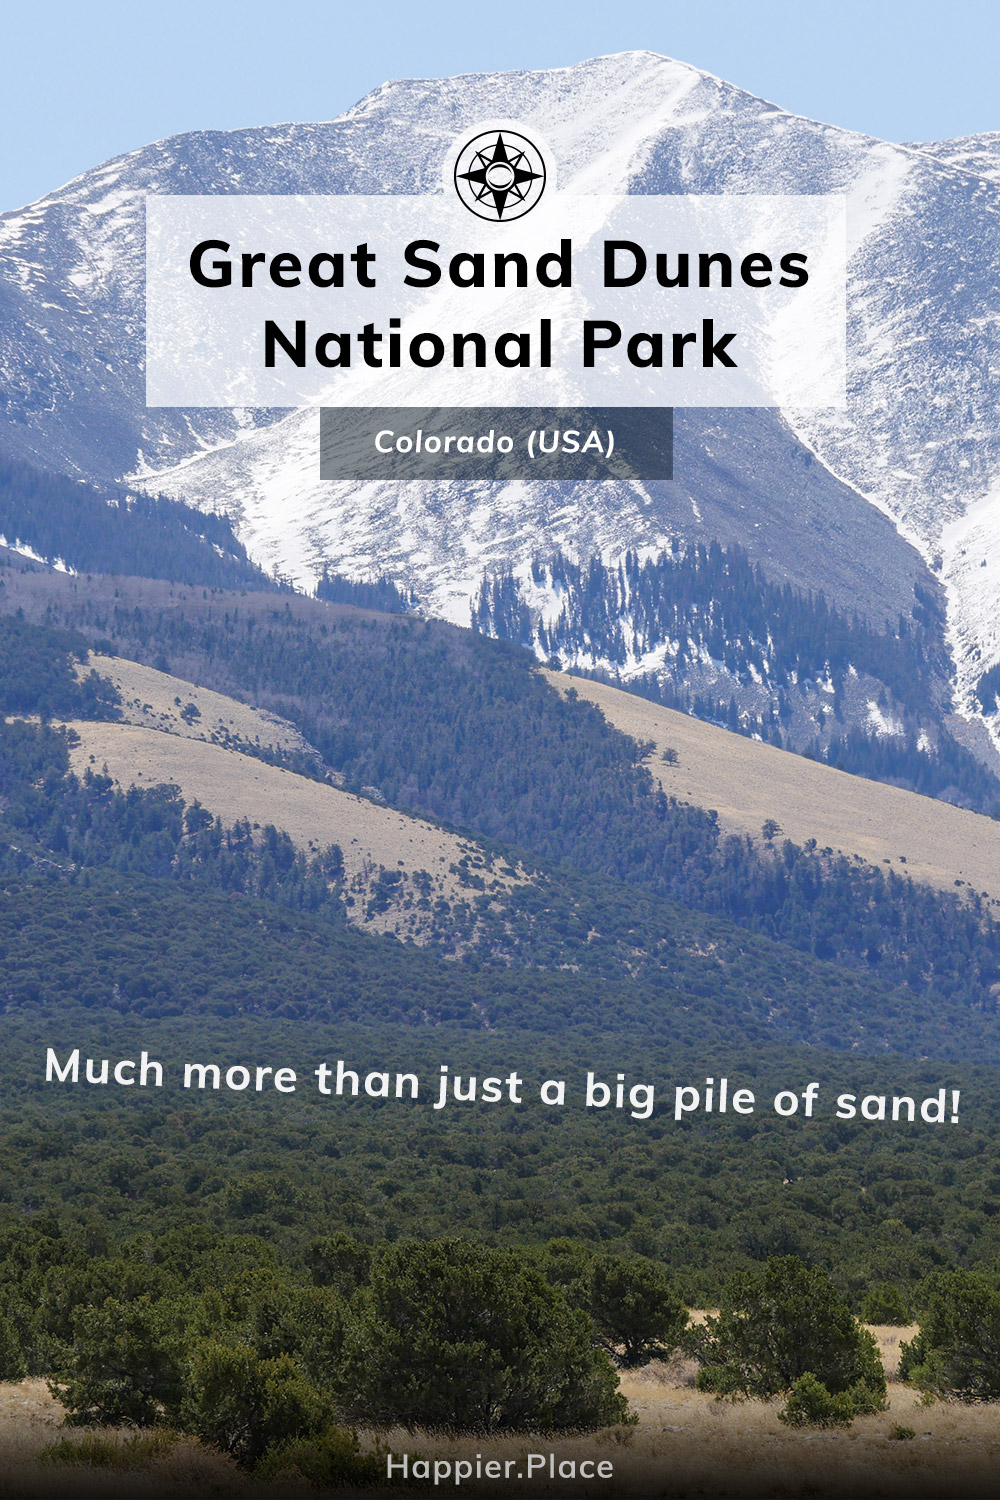 Great Sand Dunes National Park, Colorado, USA, more than just a pile of sand, mountains, forest, Happier Place